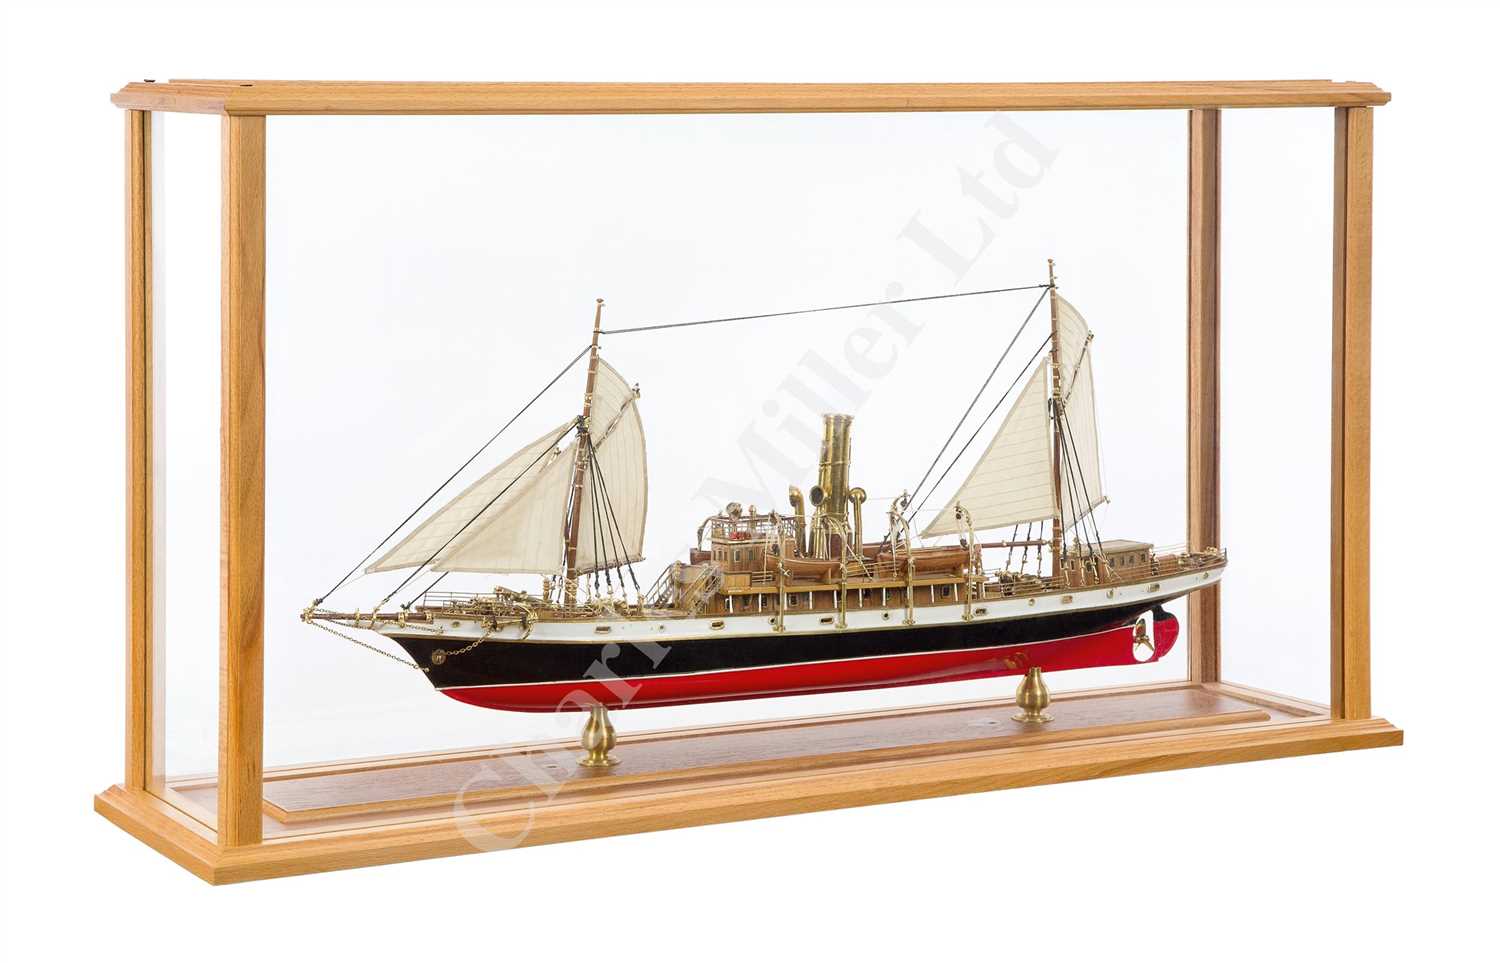 Lot 322 - A 1:65 SCALE STATIC DISPLAY MODEL FOR THE IMPERIAL RUSSIAN HARBOUR PATROL SHIP COMMANDER BERING [1905]